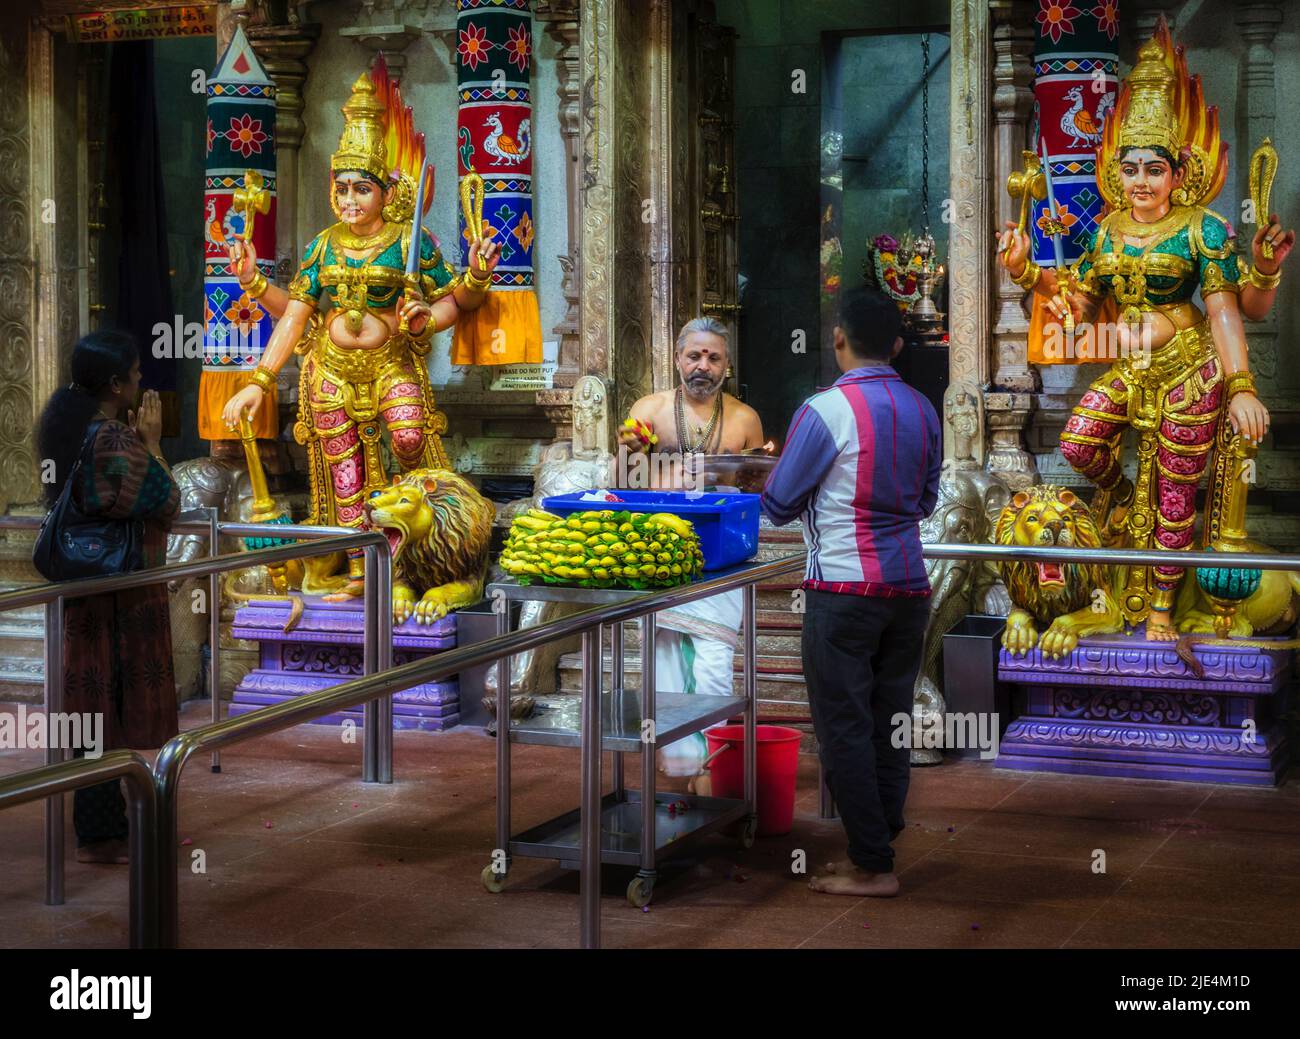 A priest and worshippers in the Sri Veeramakaliamman Temple, Serangoon Road, Little India, Republic of Singapore.  This Hindu temple is one of the old Stock Photo